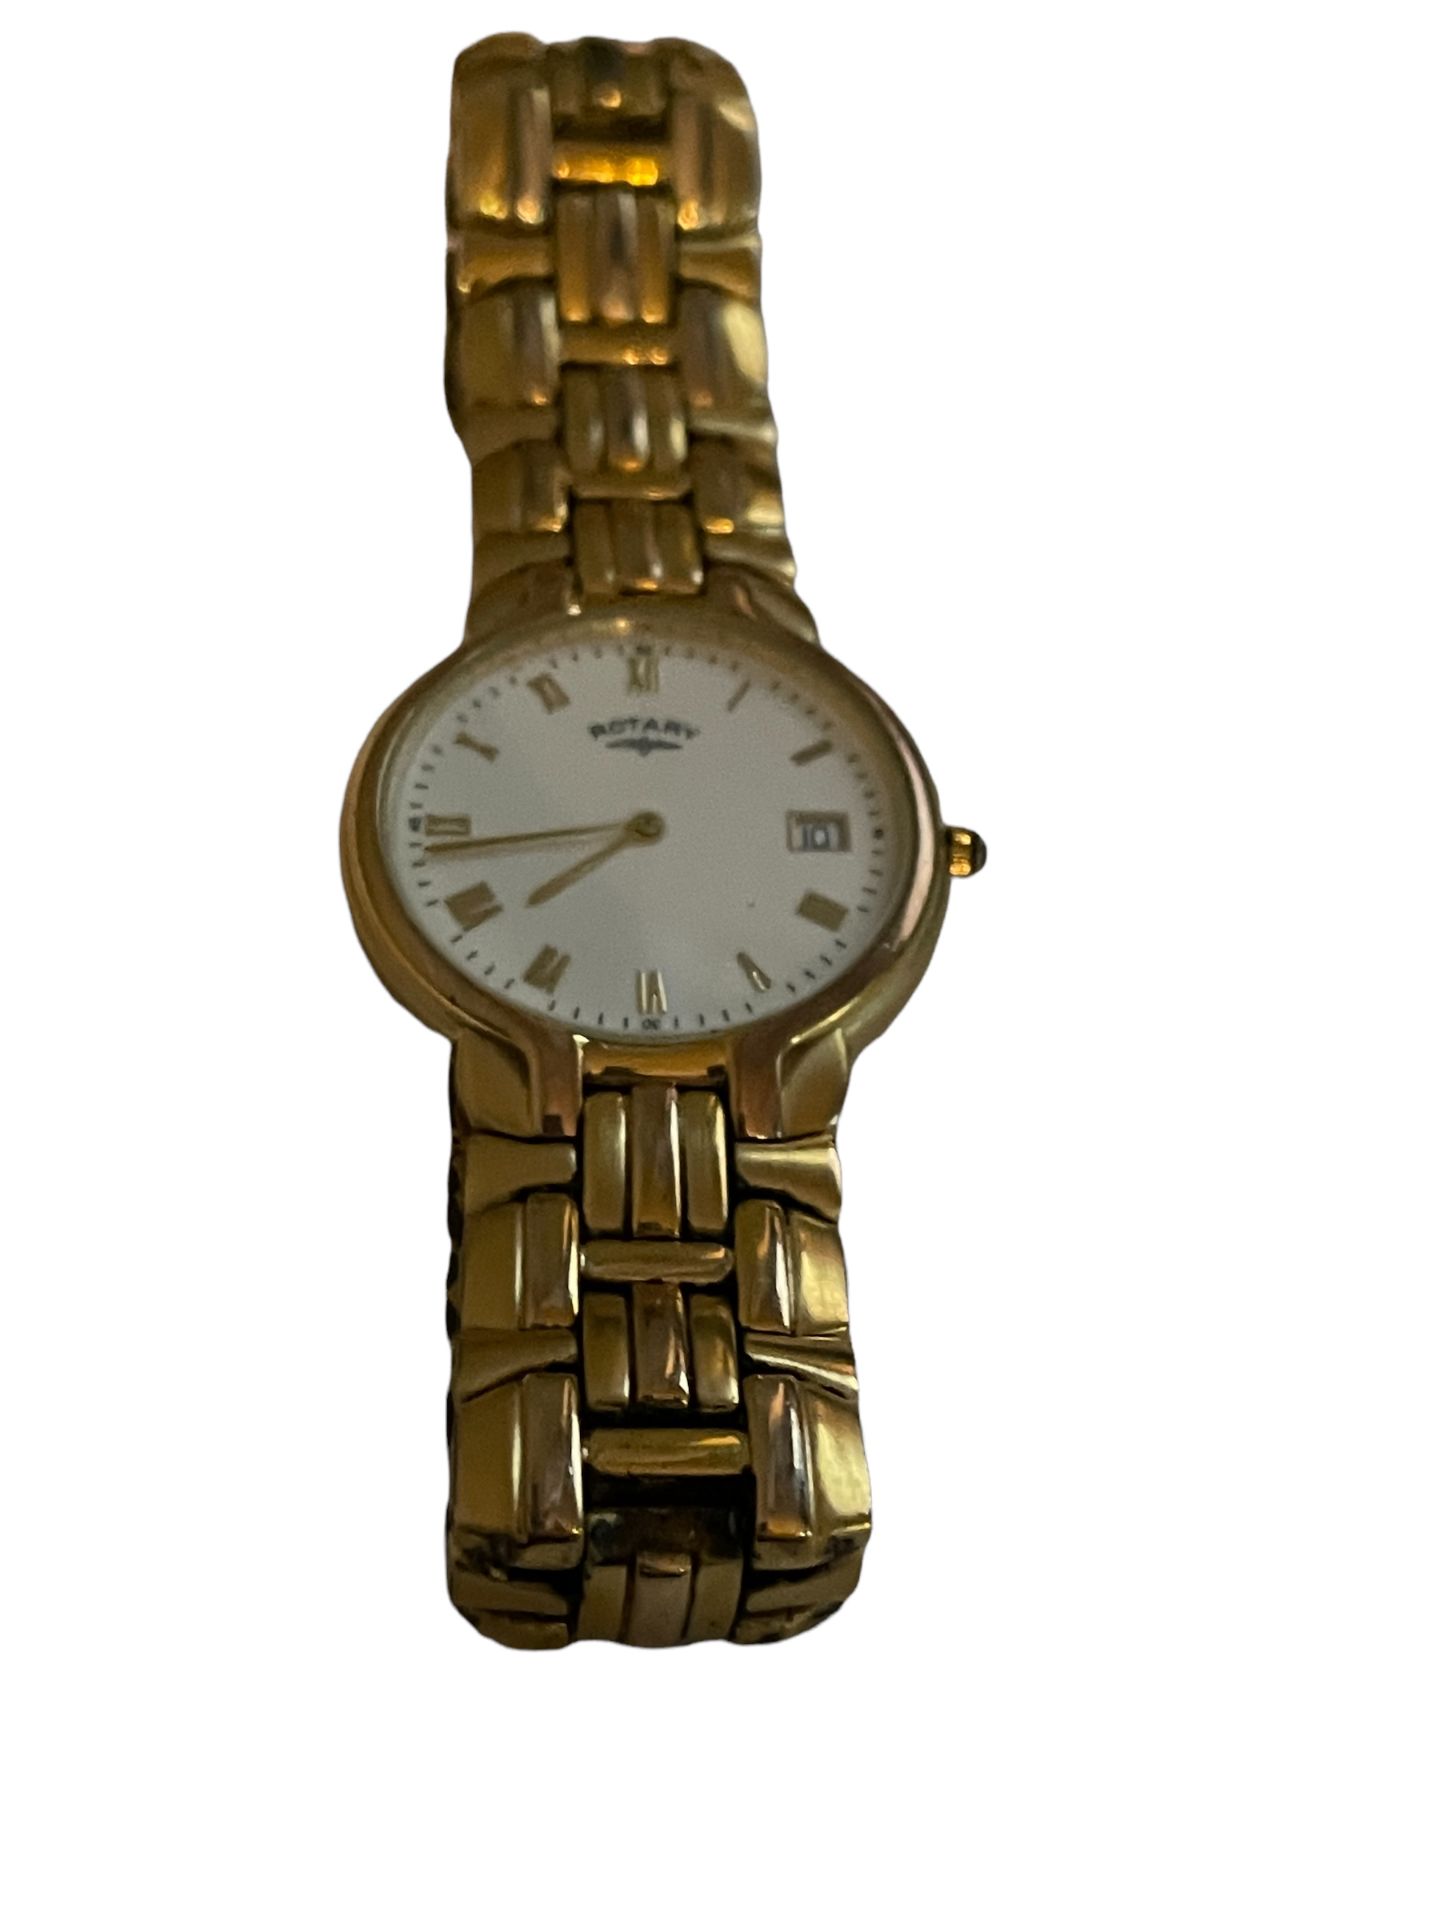 Mens Rotary Gold Plated Watch - Return Stock from our Private Jet Charter - Image 5 of 14